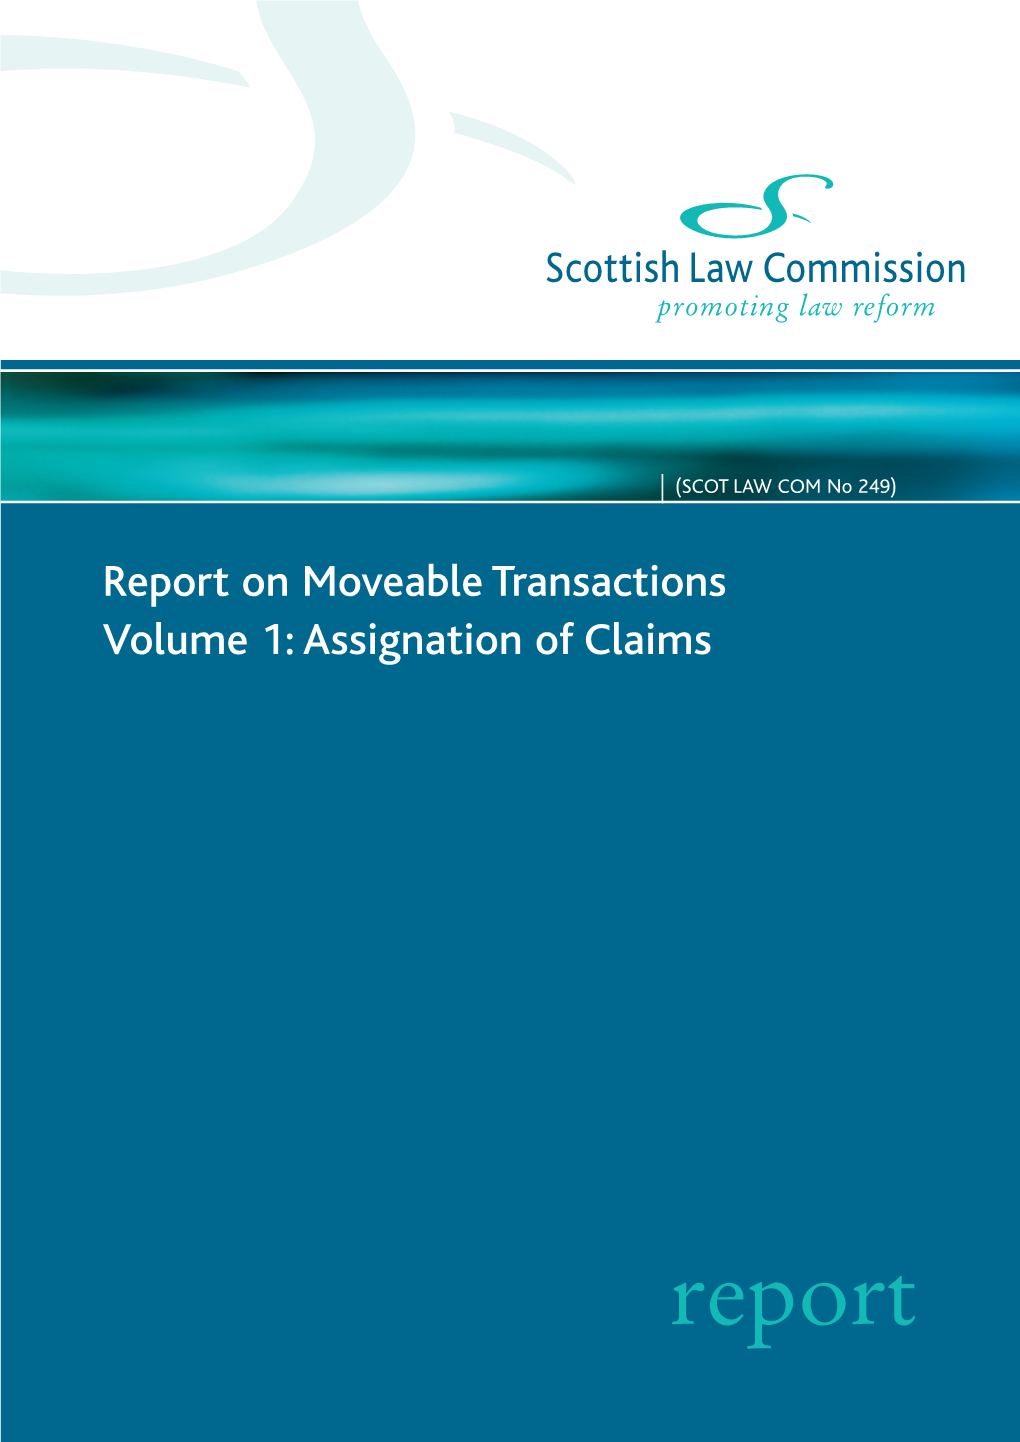 Report on Moveable Transactions Volume 1: Assignation of Claims